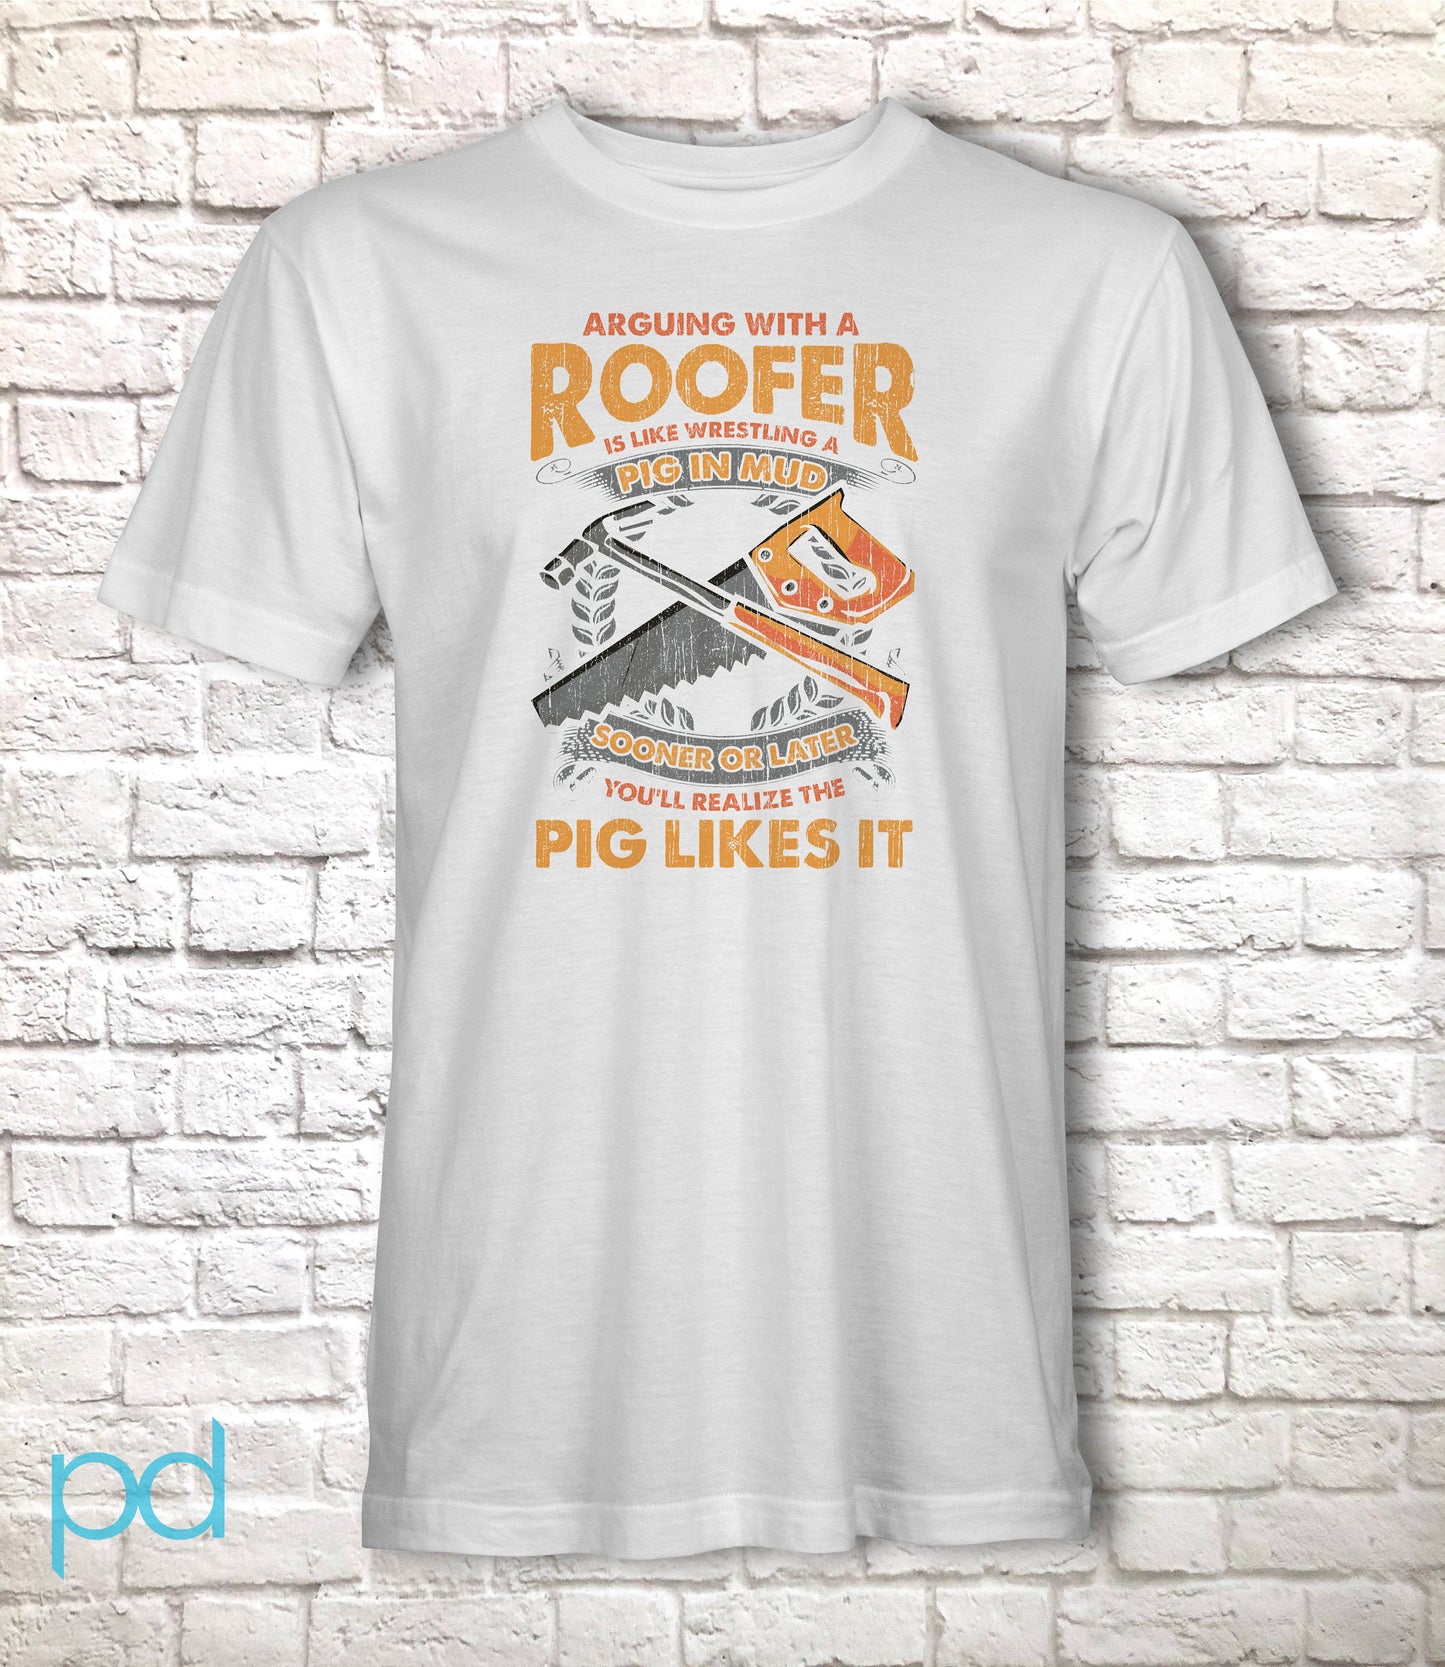 Funny Roofer Gift T-Shirt, Funny Roofer T Shirt Pun Gift Idea, Humorous Roofing Tee Shirt T Top